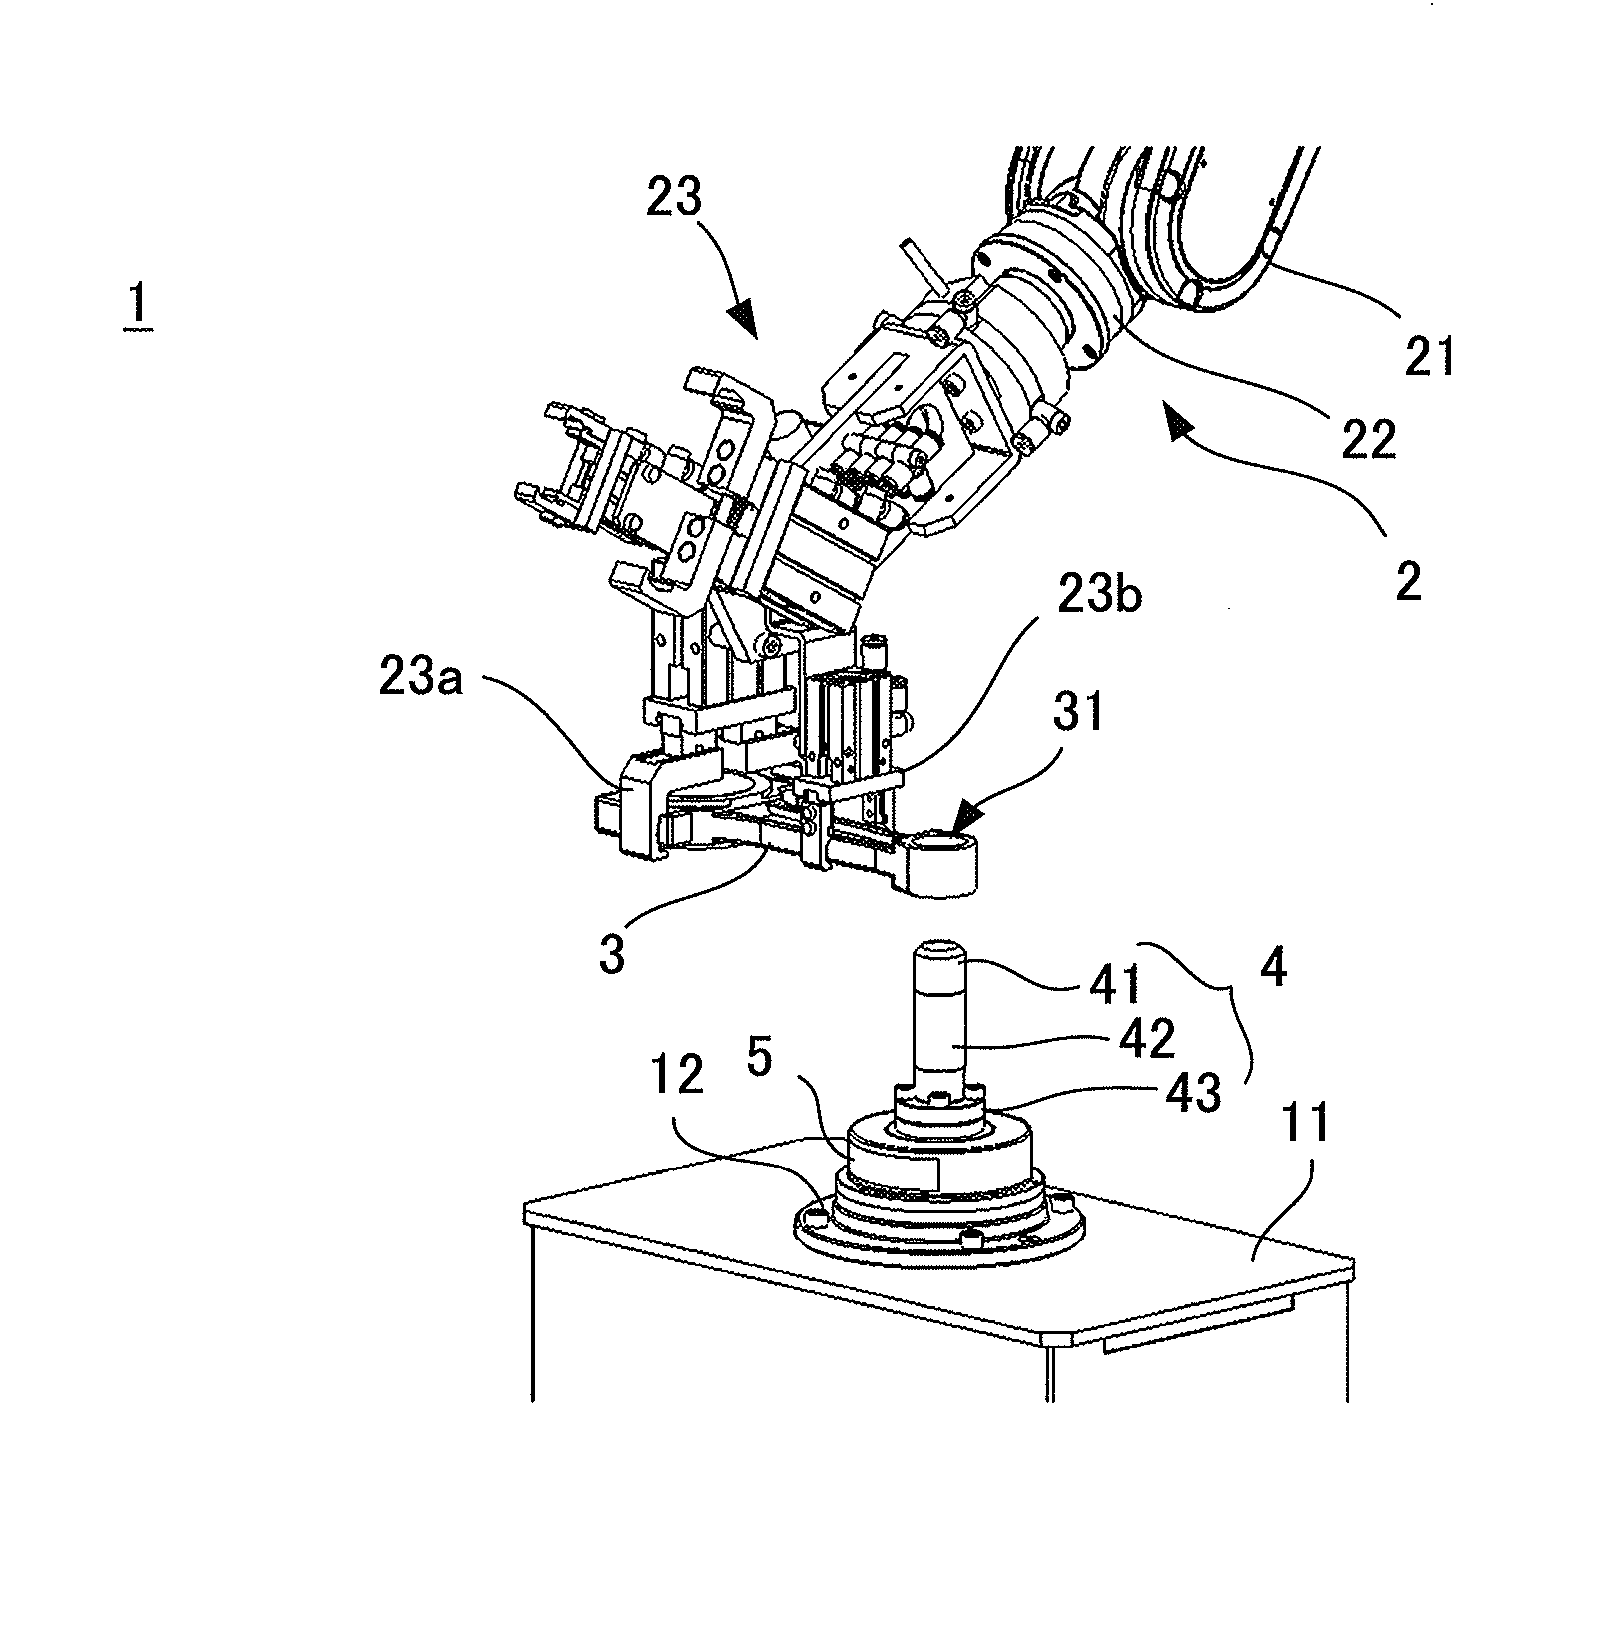 Inspection system for inspecting object using force sensor